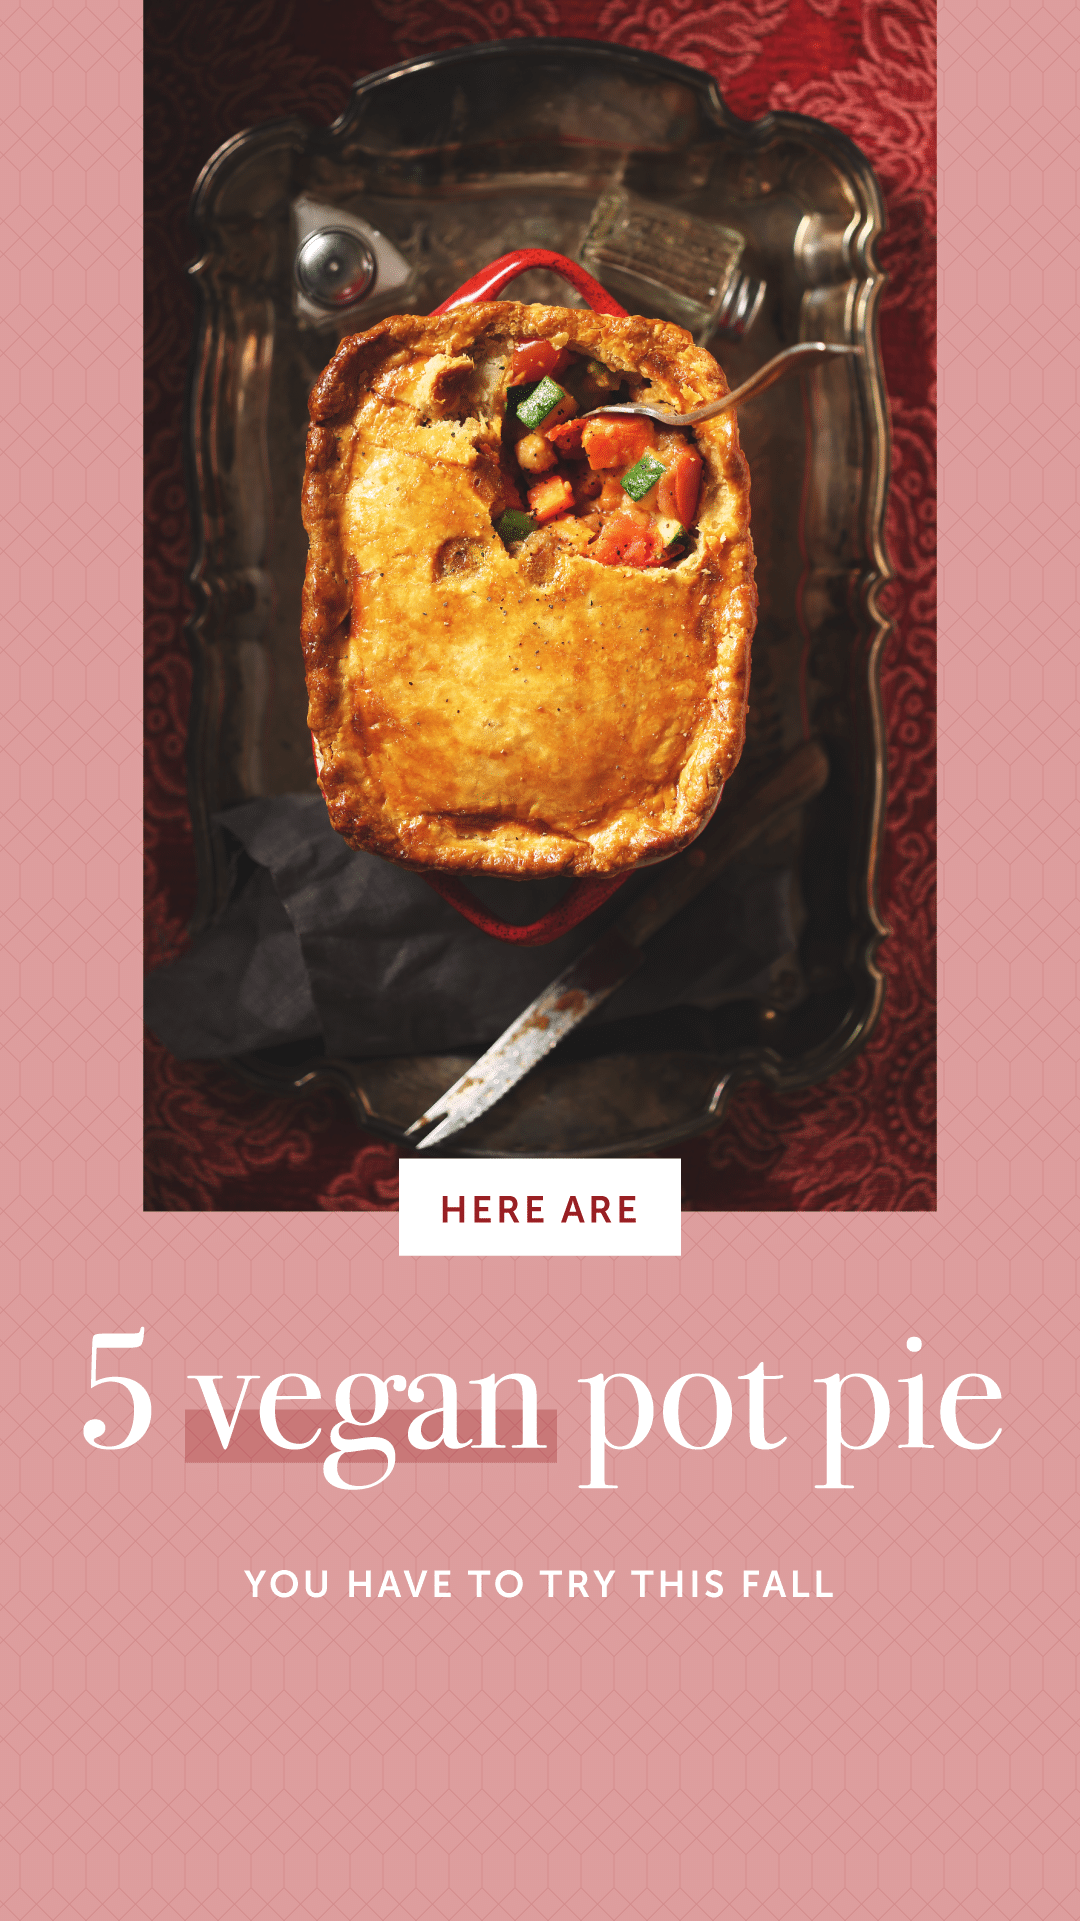 Here Are 5 Vegan Pot Pie Recipes You Have to Try This Fall